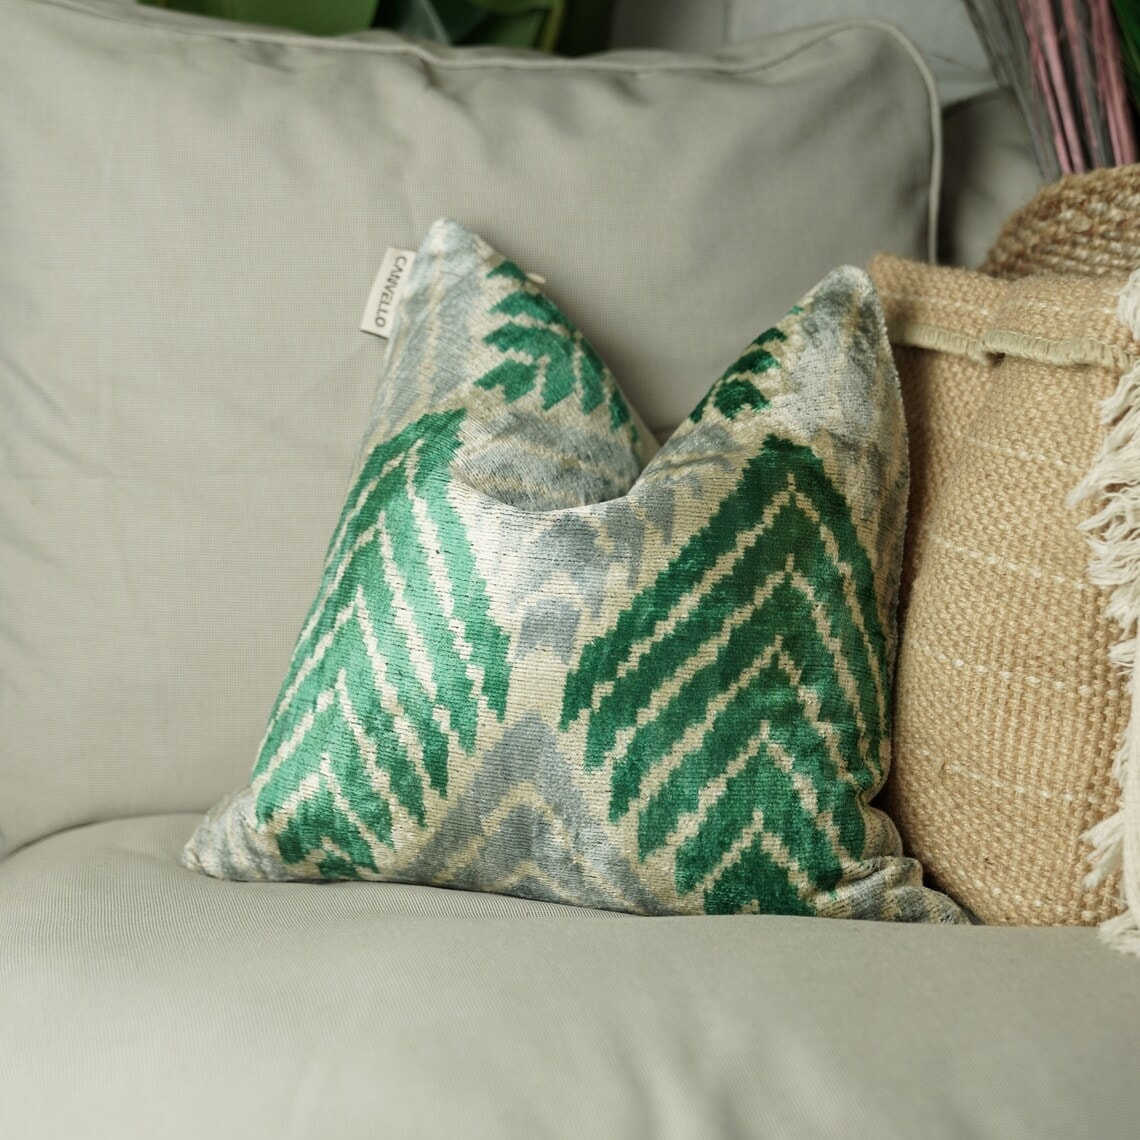 https://ak1.ostkcdn.com/images/products/is/images/direct/c929714c0658544fc15903700269dcec2f00b608/Handmade-Modern-Throw-Pillows-With-Insert-Green-Boho-Velvet-16x16-in.jpg